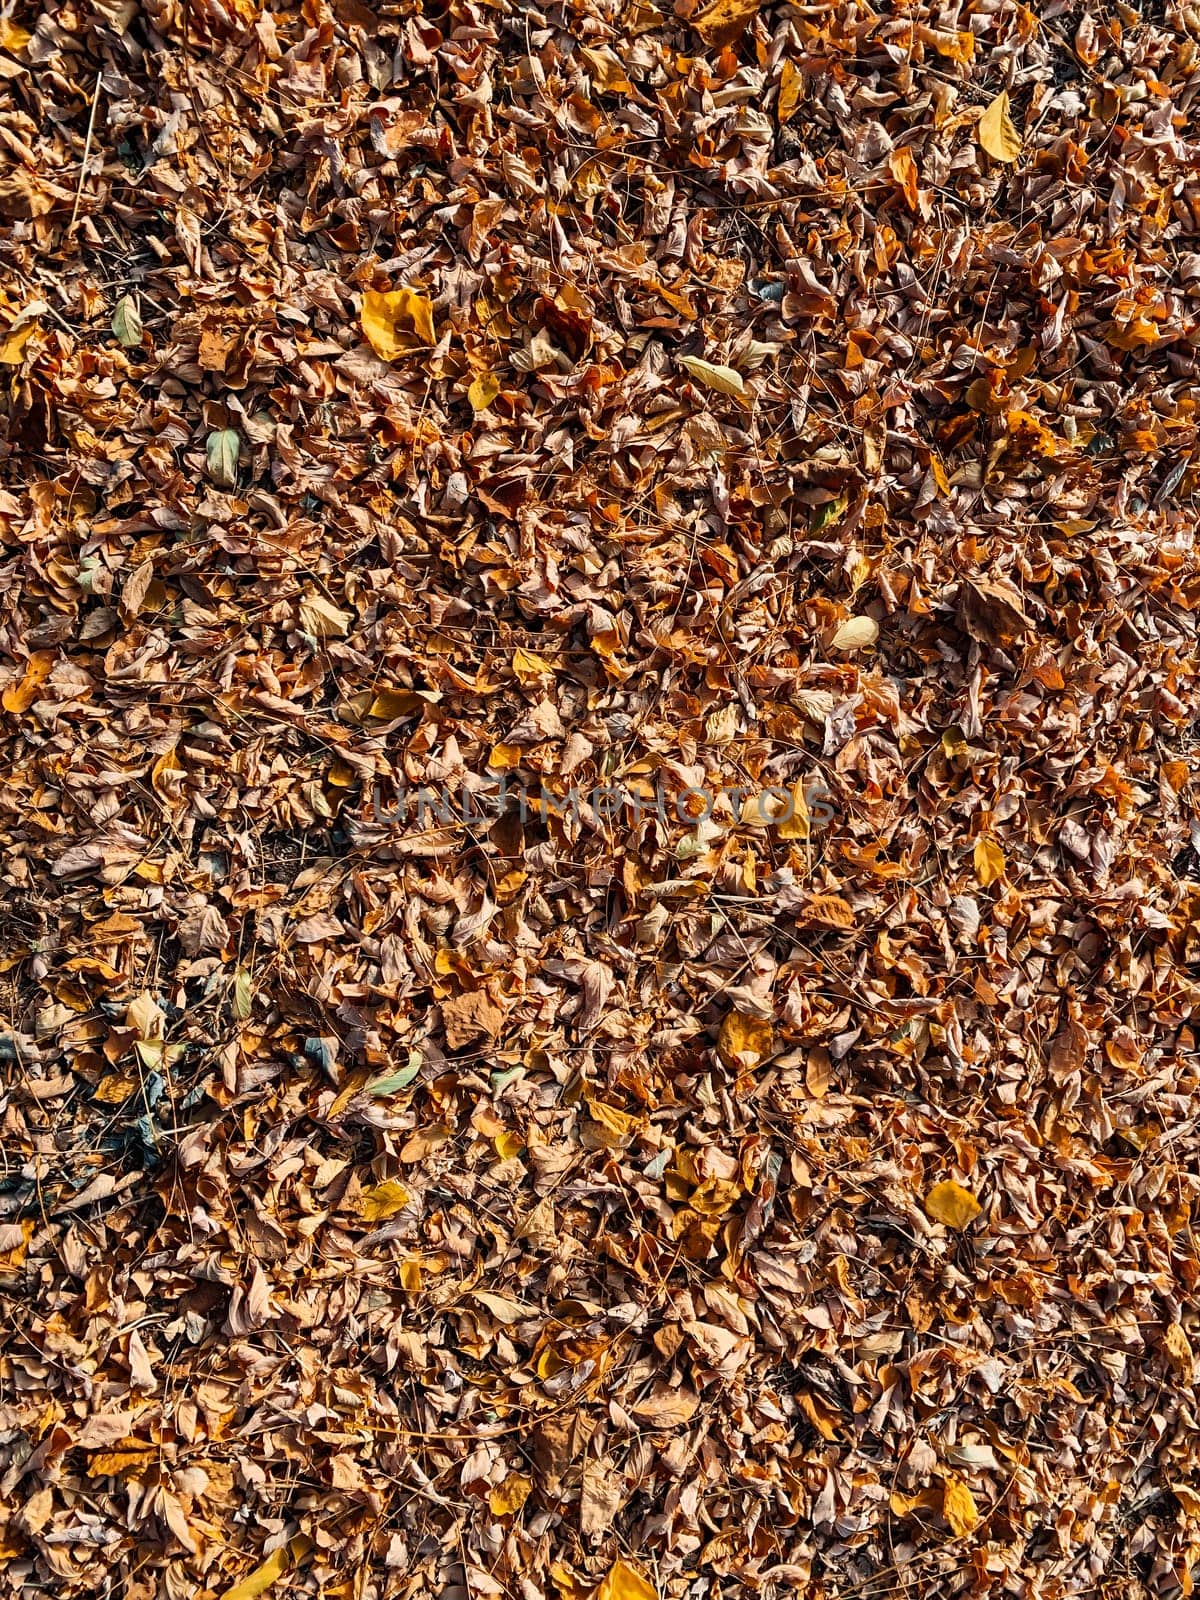 yellow and orange autumn fallen leaves as a background by Simakov